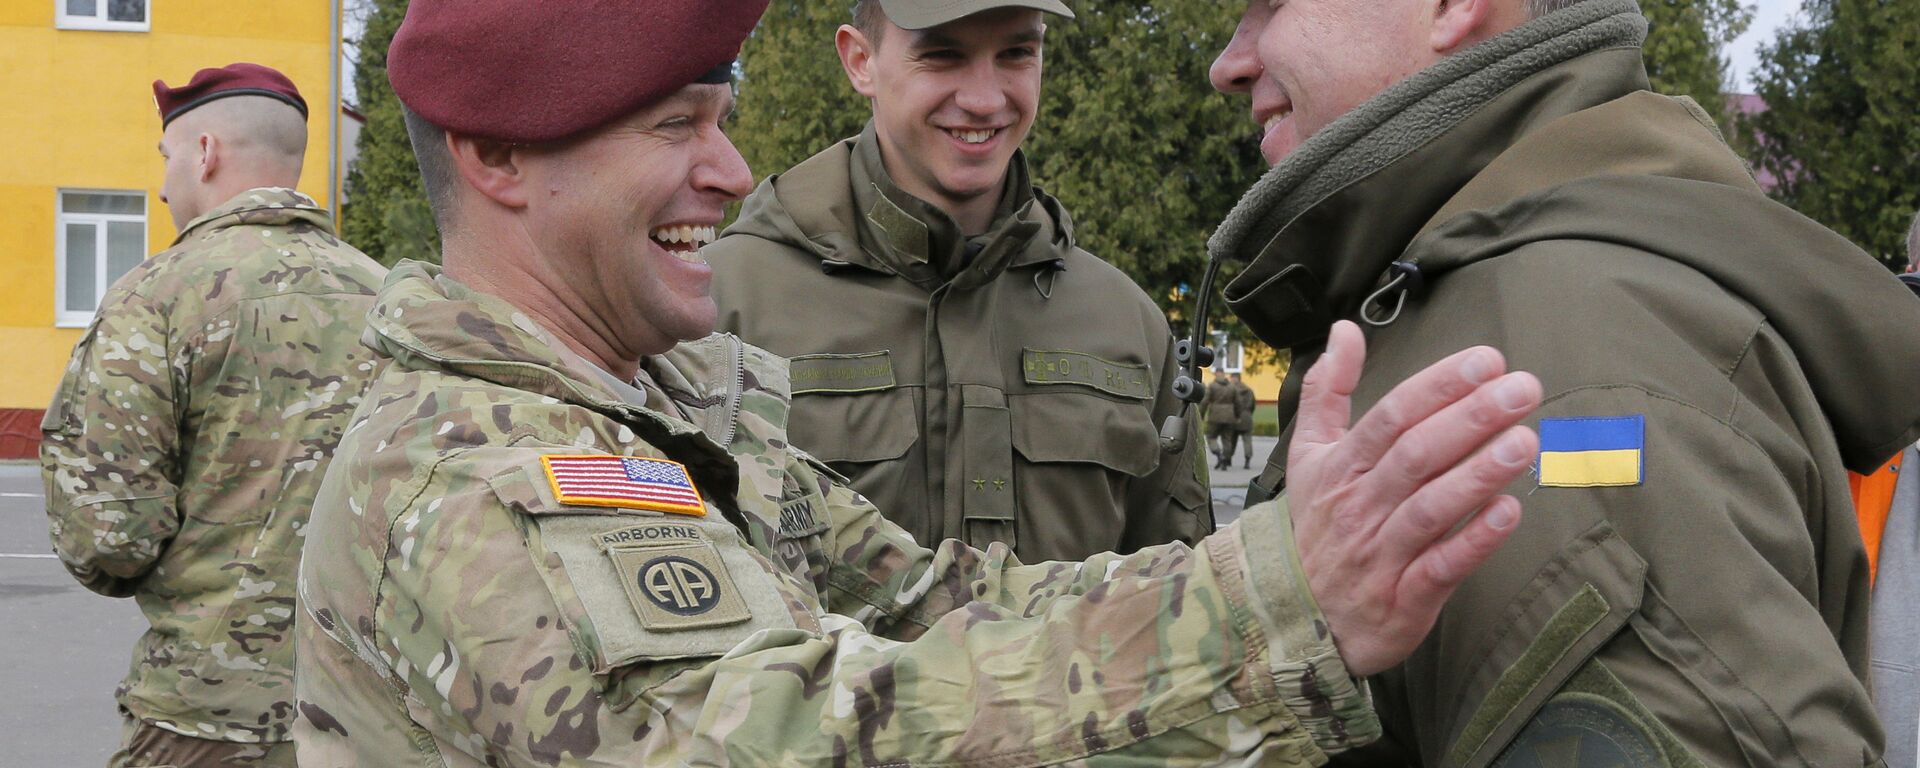 US and Ukrainian soldiers talk during the opening ceremony of Fearless Guardian - 2015 - Sputnik International, 1920, 09.05.2022